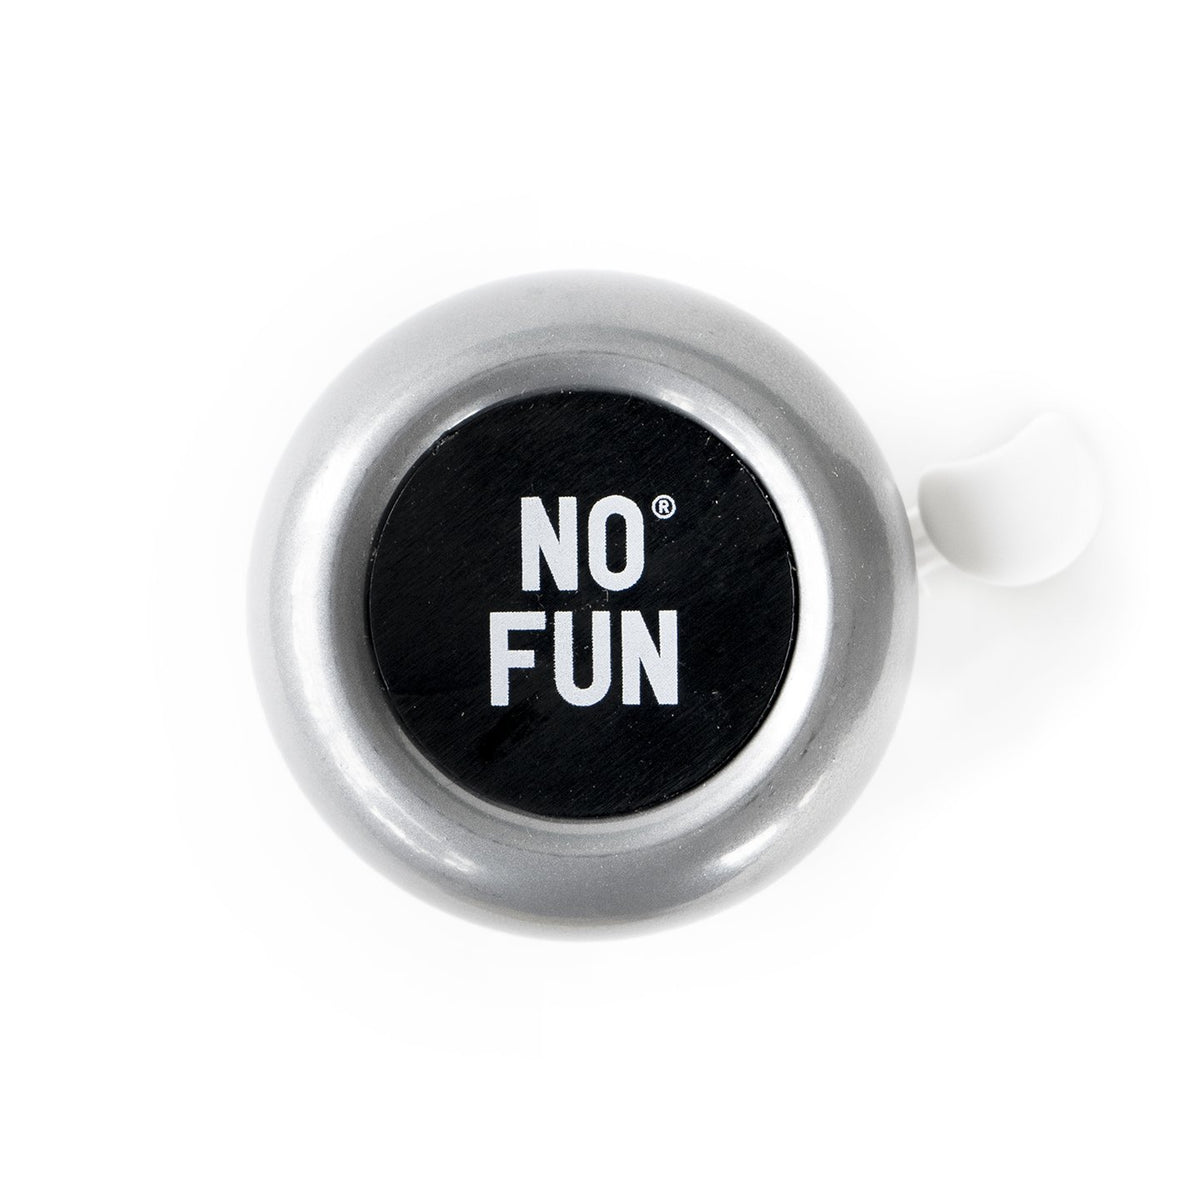 Official "NO FUN®" bicycle bell.  Bell is fabricated with metal and plastic, and features a black disk in the center with white "NO FUN®" branding.